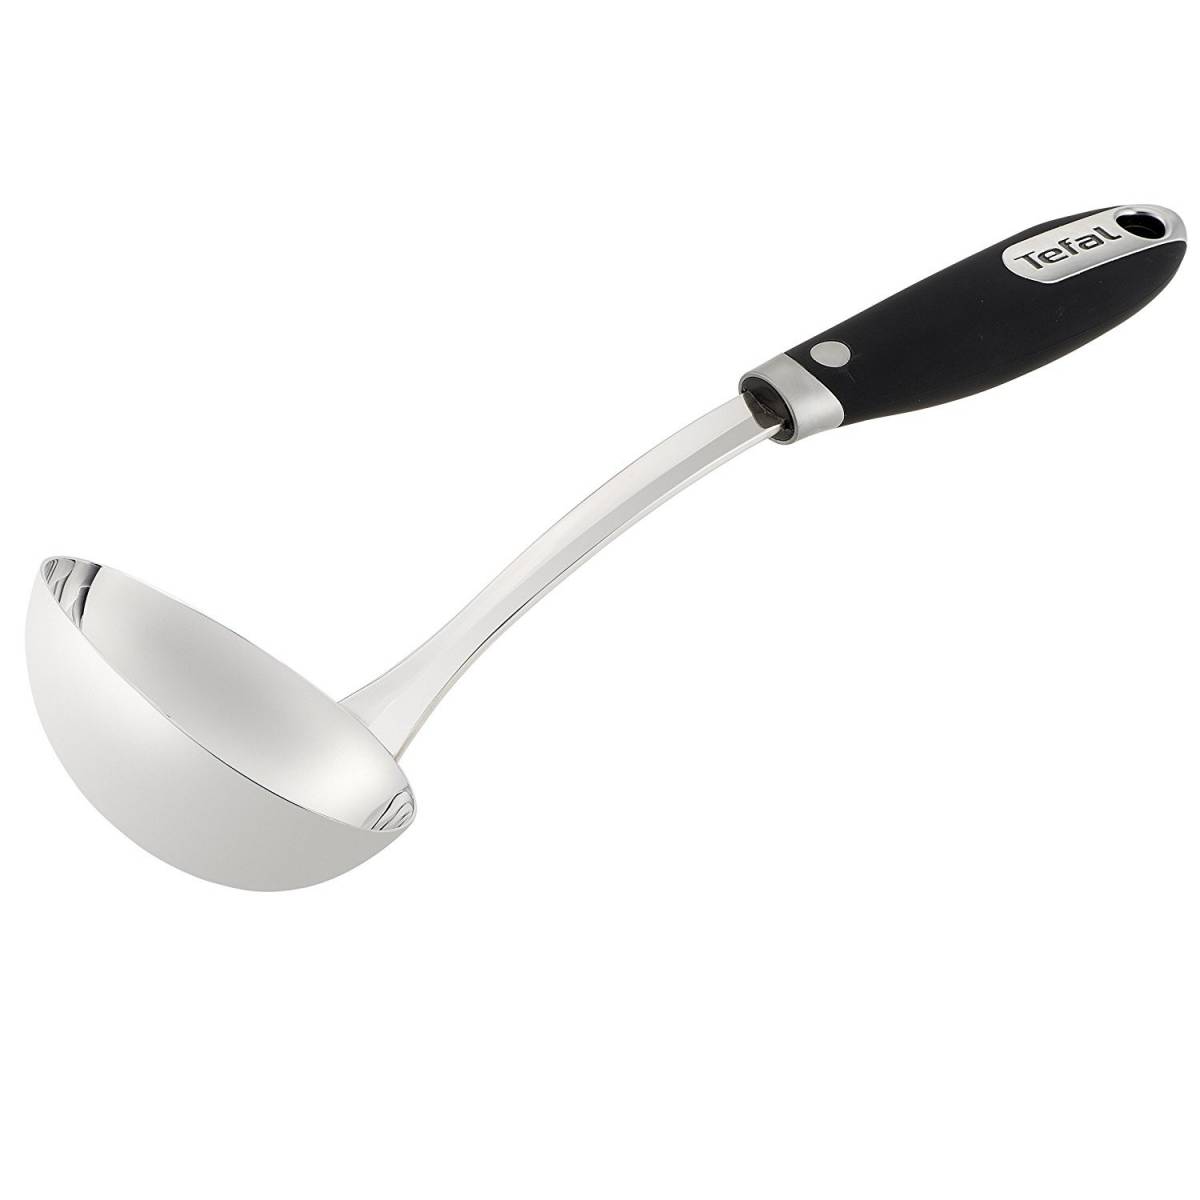 Tefal Talent - Stainless Steel Ladle